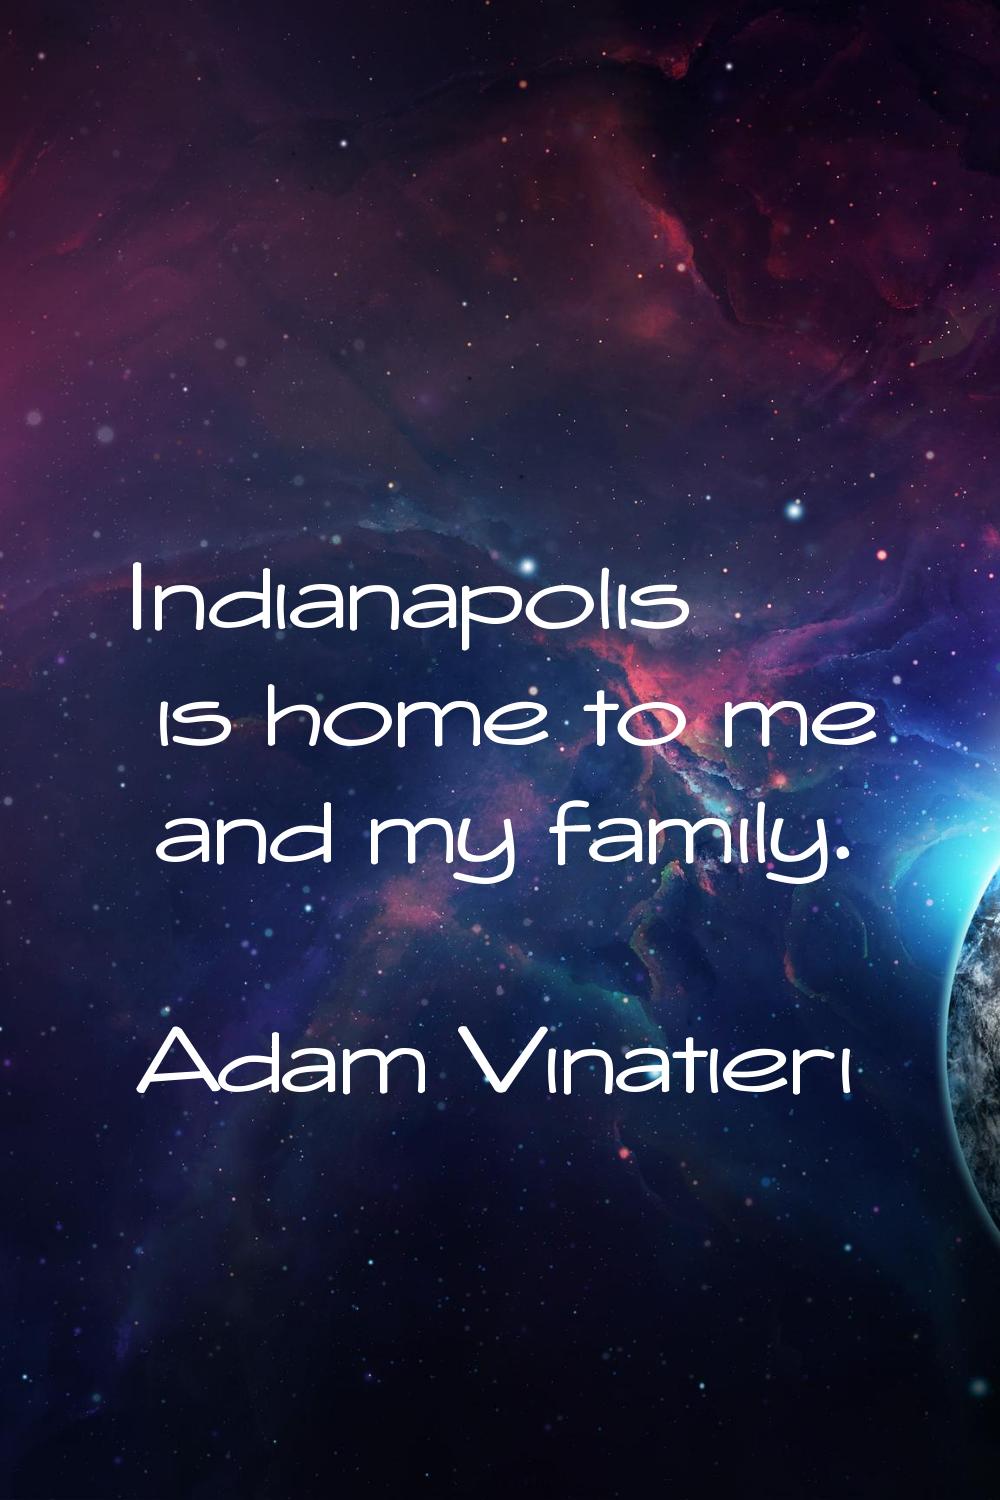 Indianapolis is home to me and my family.